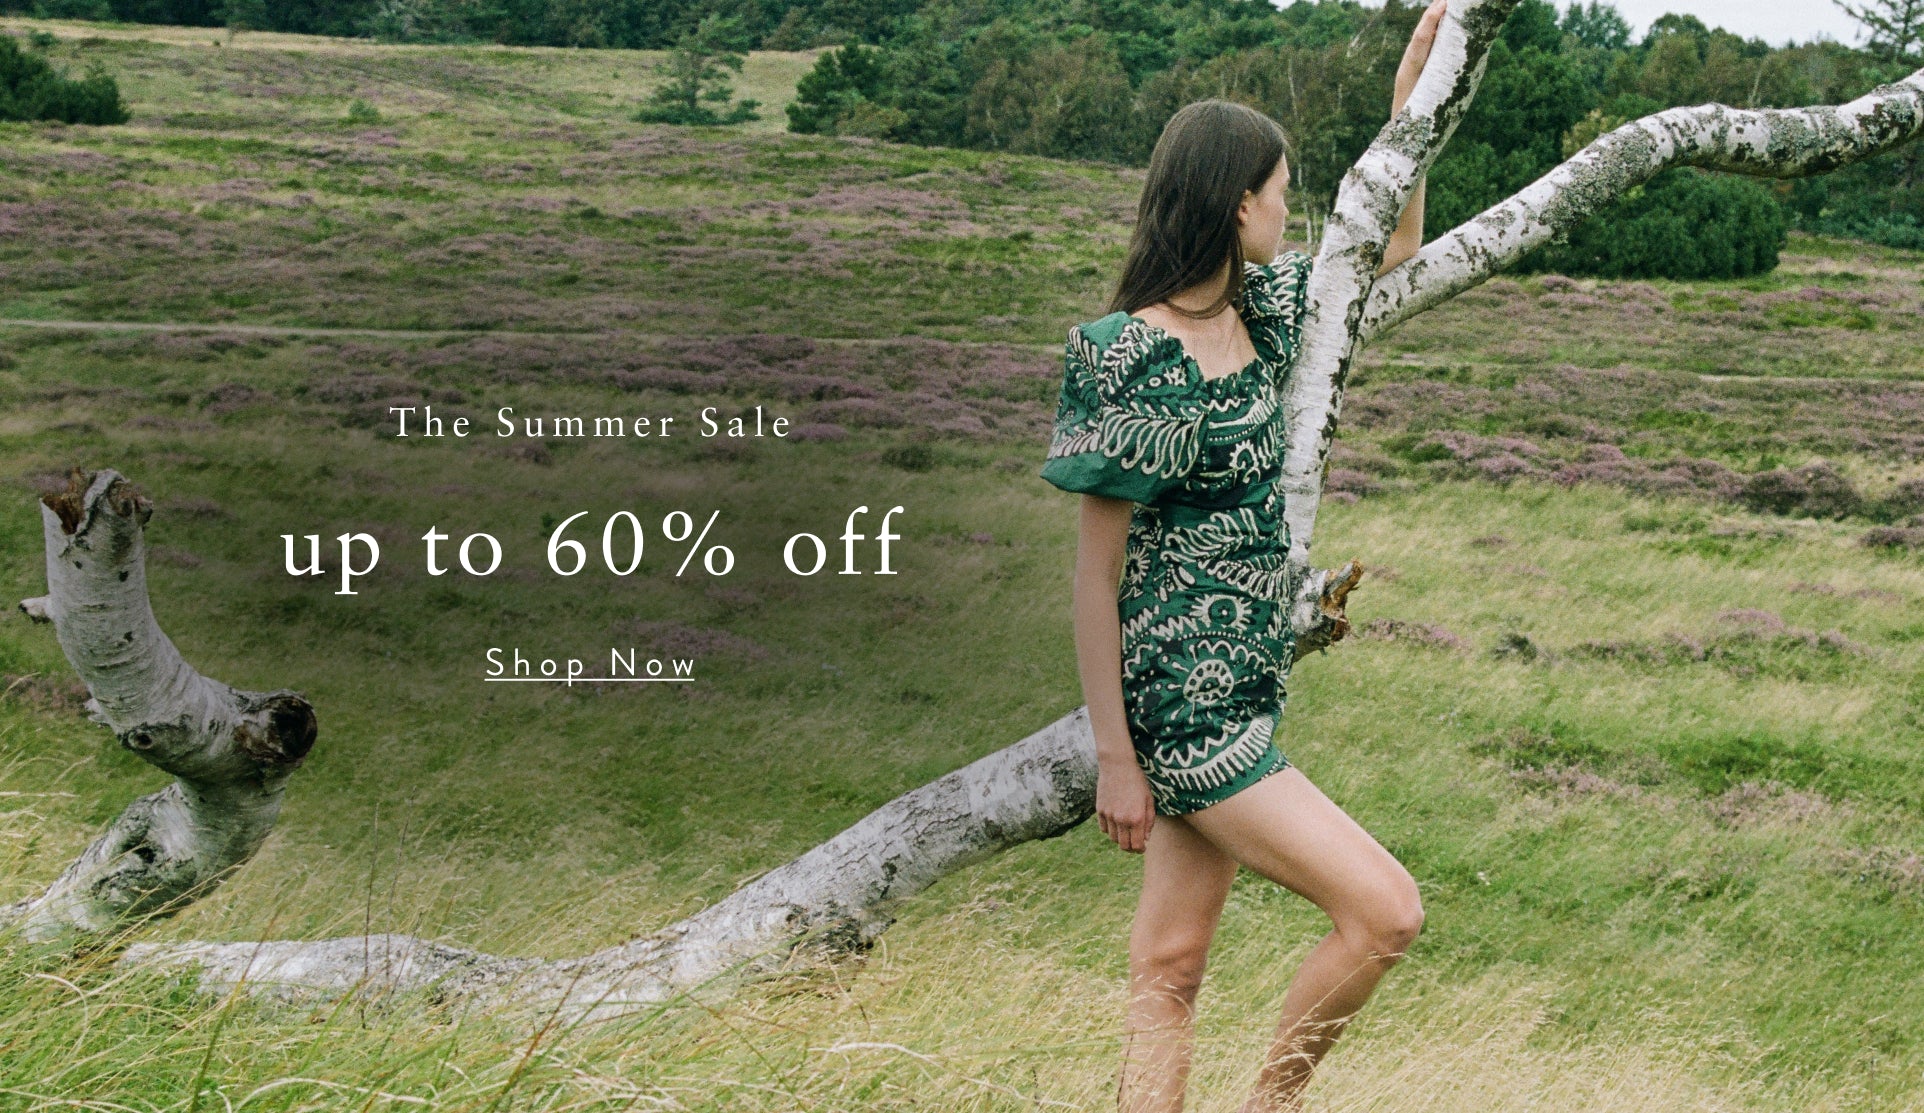 THE SUMMER SALE